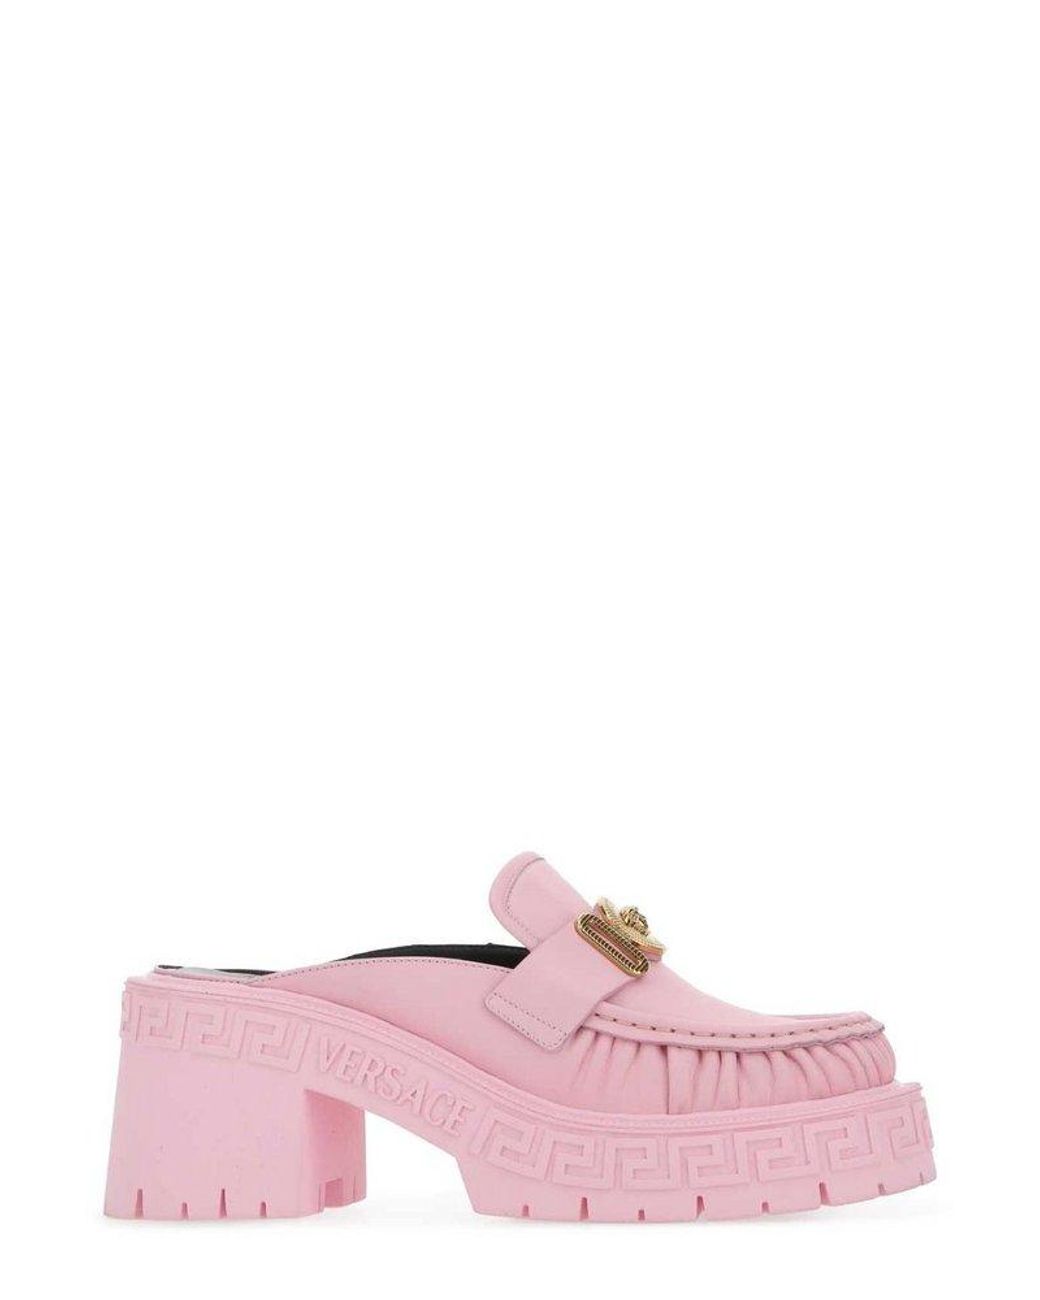 Versace Leather Medusa Biggie Loafers in Pink | Lyst